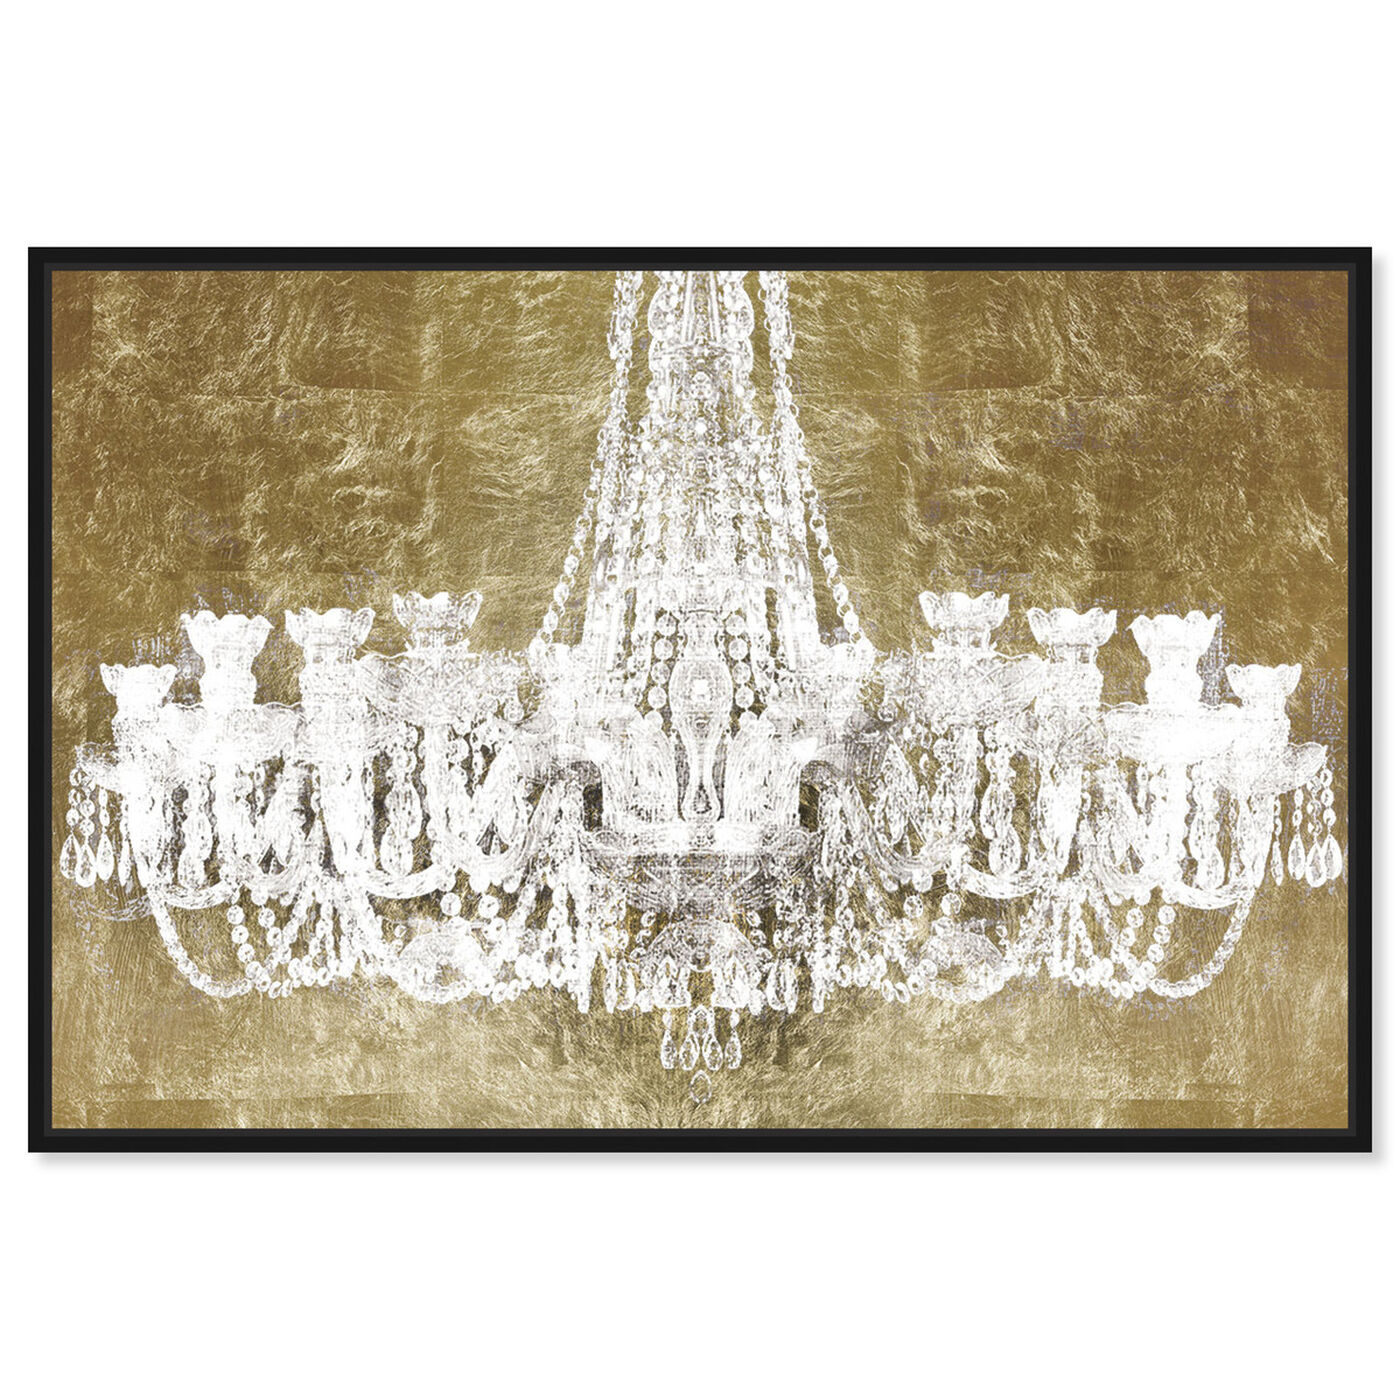 Front view of Shine Bright Like A Diamond featuring fashion and glam and chandeliers art.